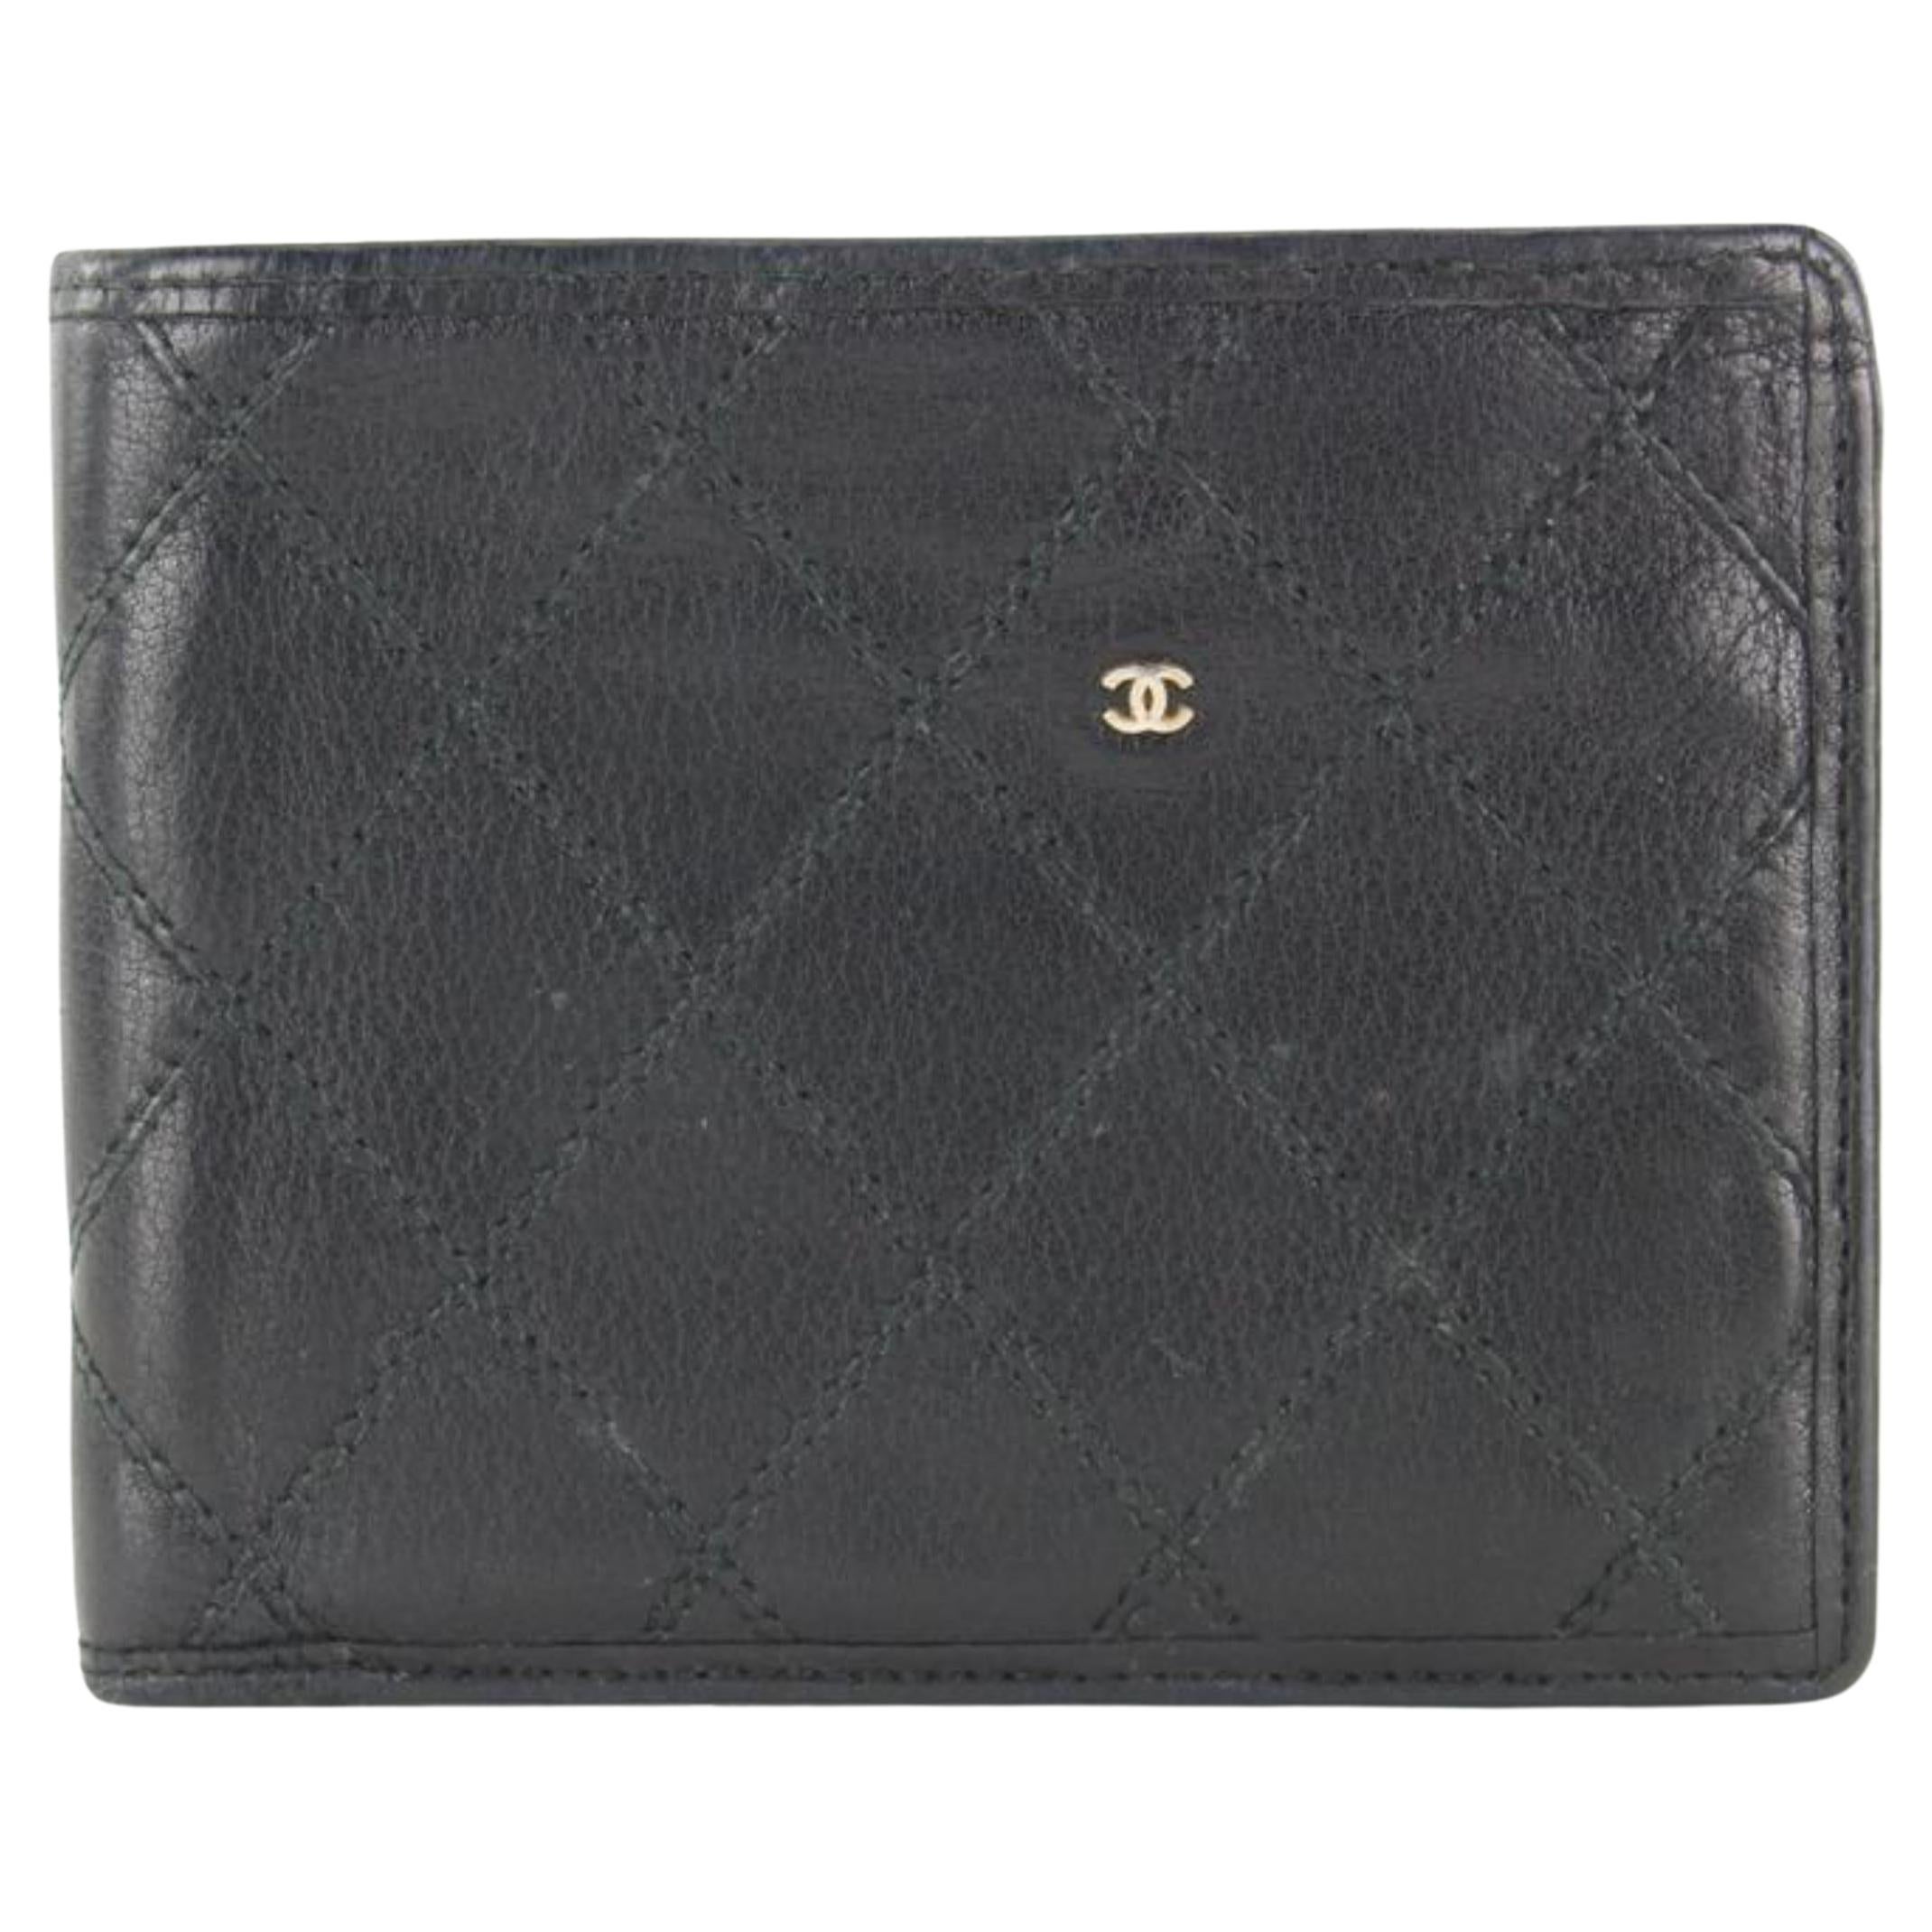 Chanel Classic Trifold Pink Flap Wallet Quilted Lambskin